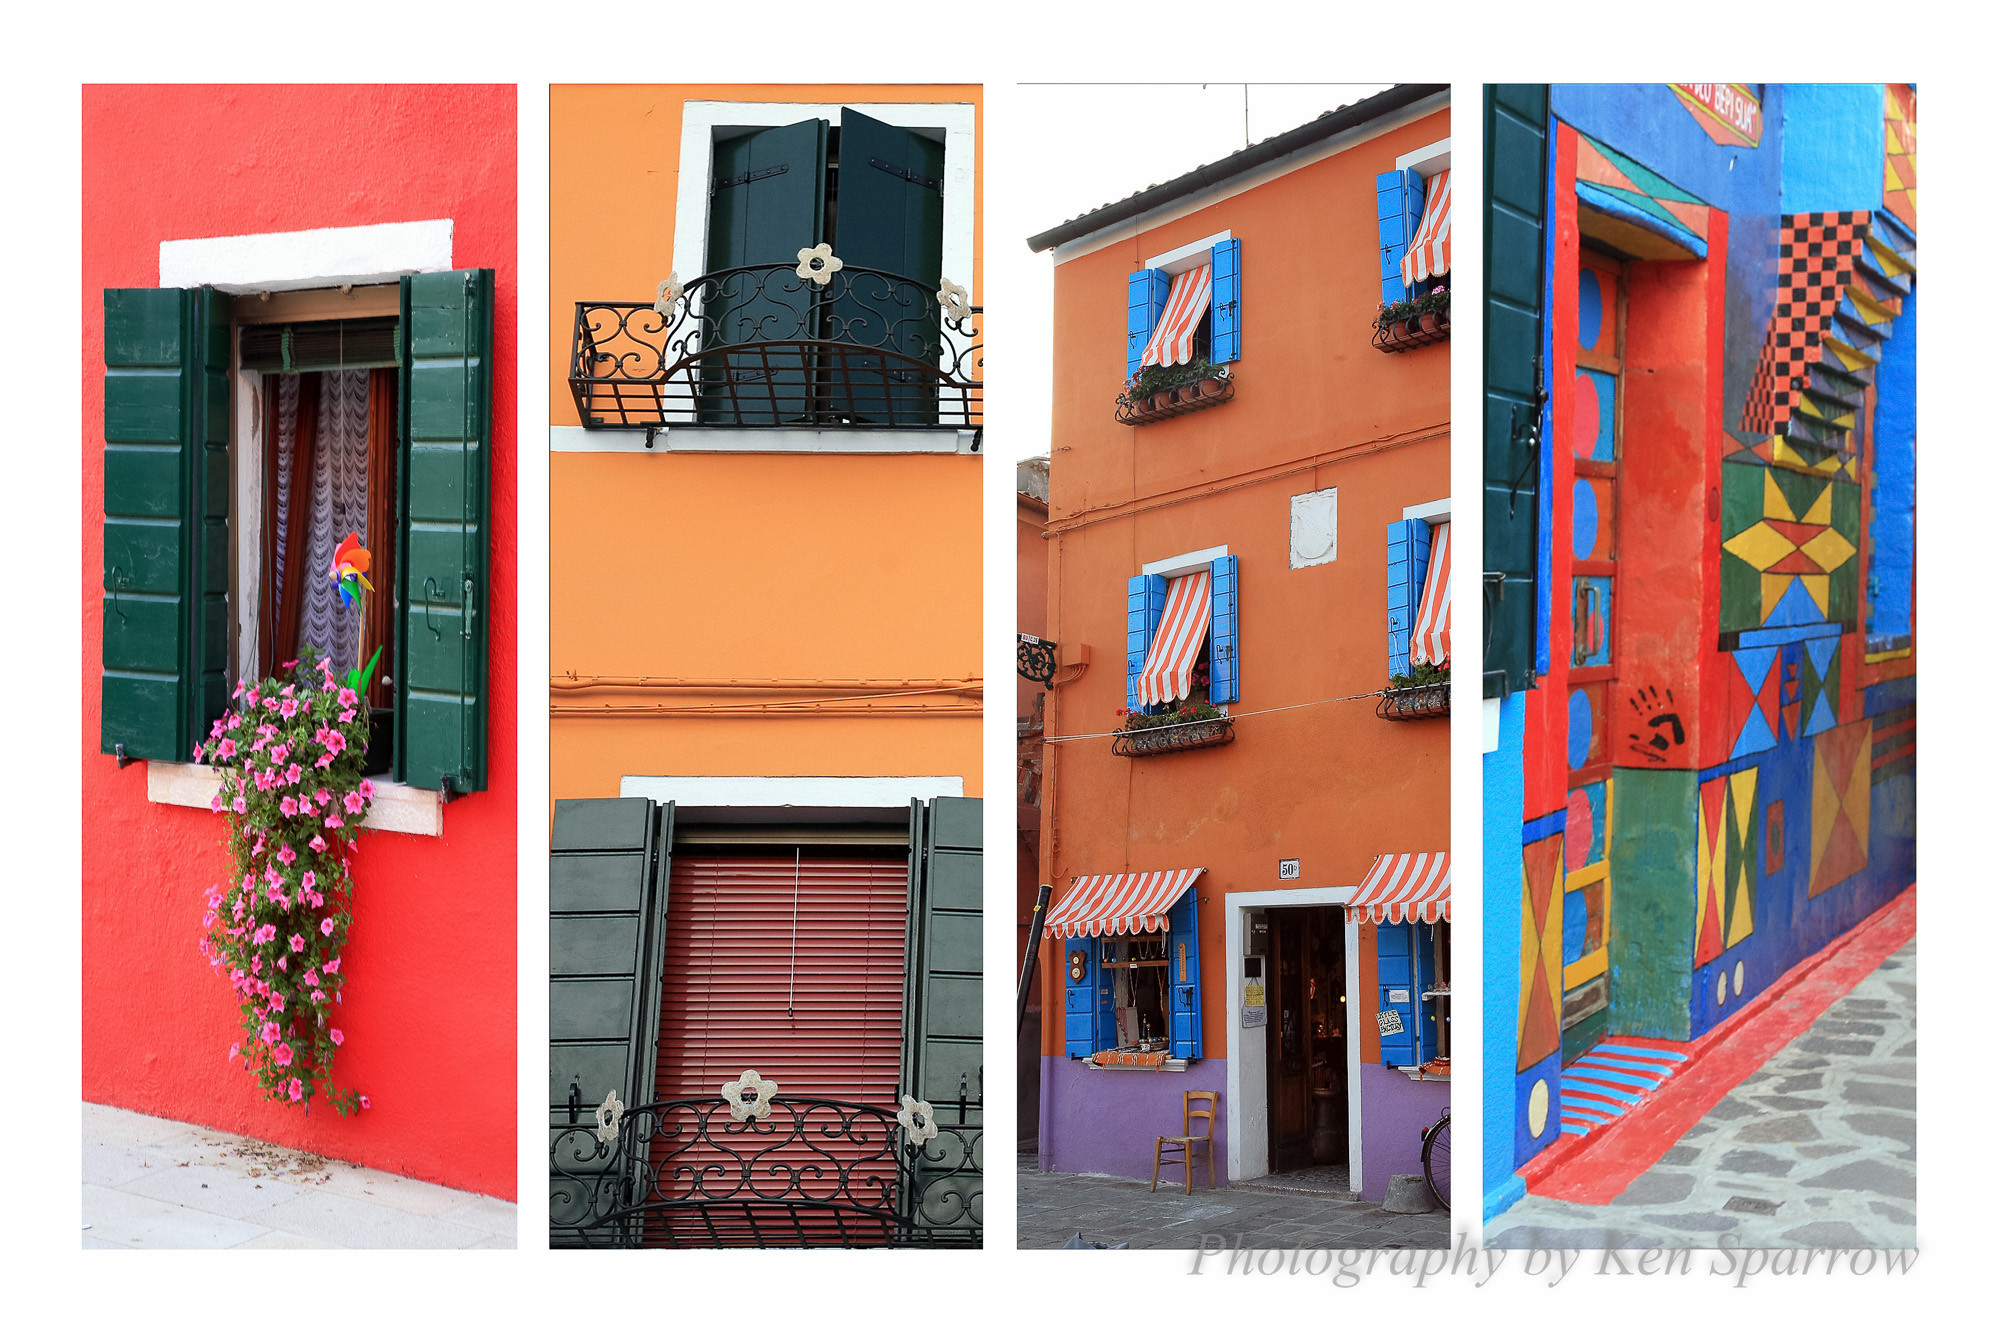  Snippets of Burano, Venice, Italy. 